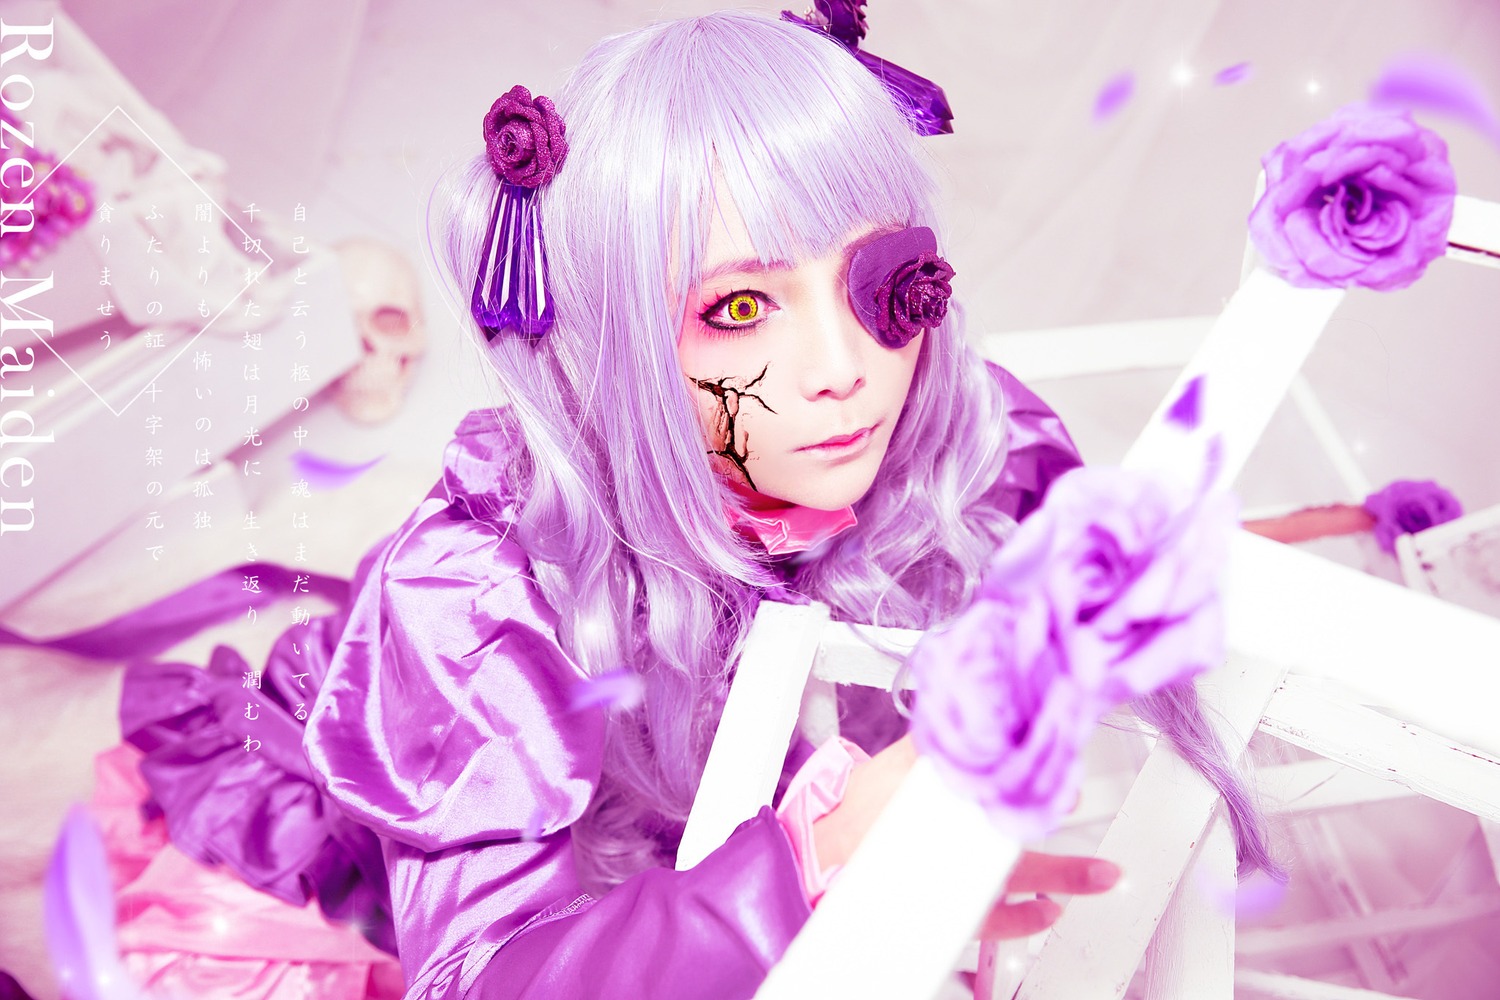 1girl blurry character_name depth_of_field eyepatch flower hair_ornament long_hair looking_at_viewer multiple_cosplay purple_flower purple_rose rose silver_hair smile solo striped tagme yellow_eyes